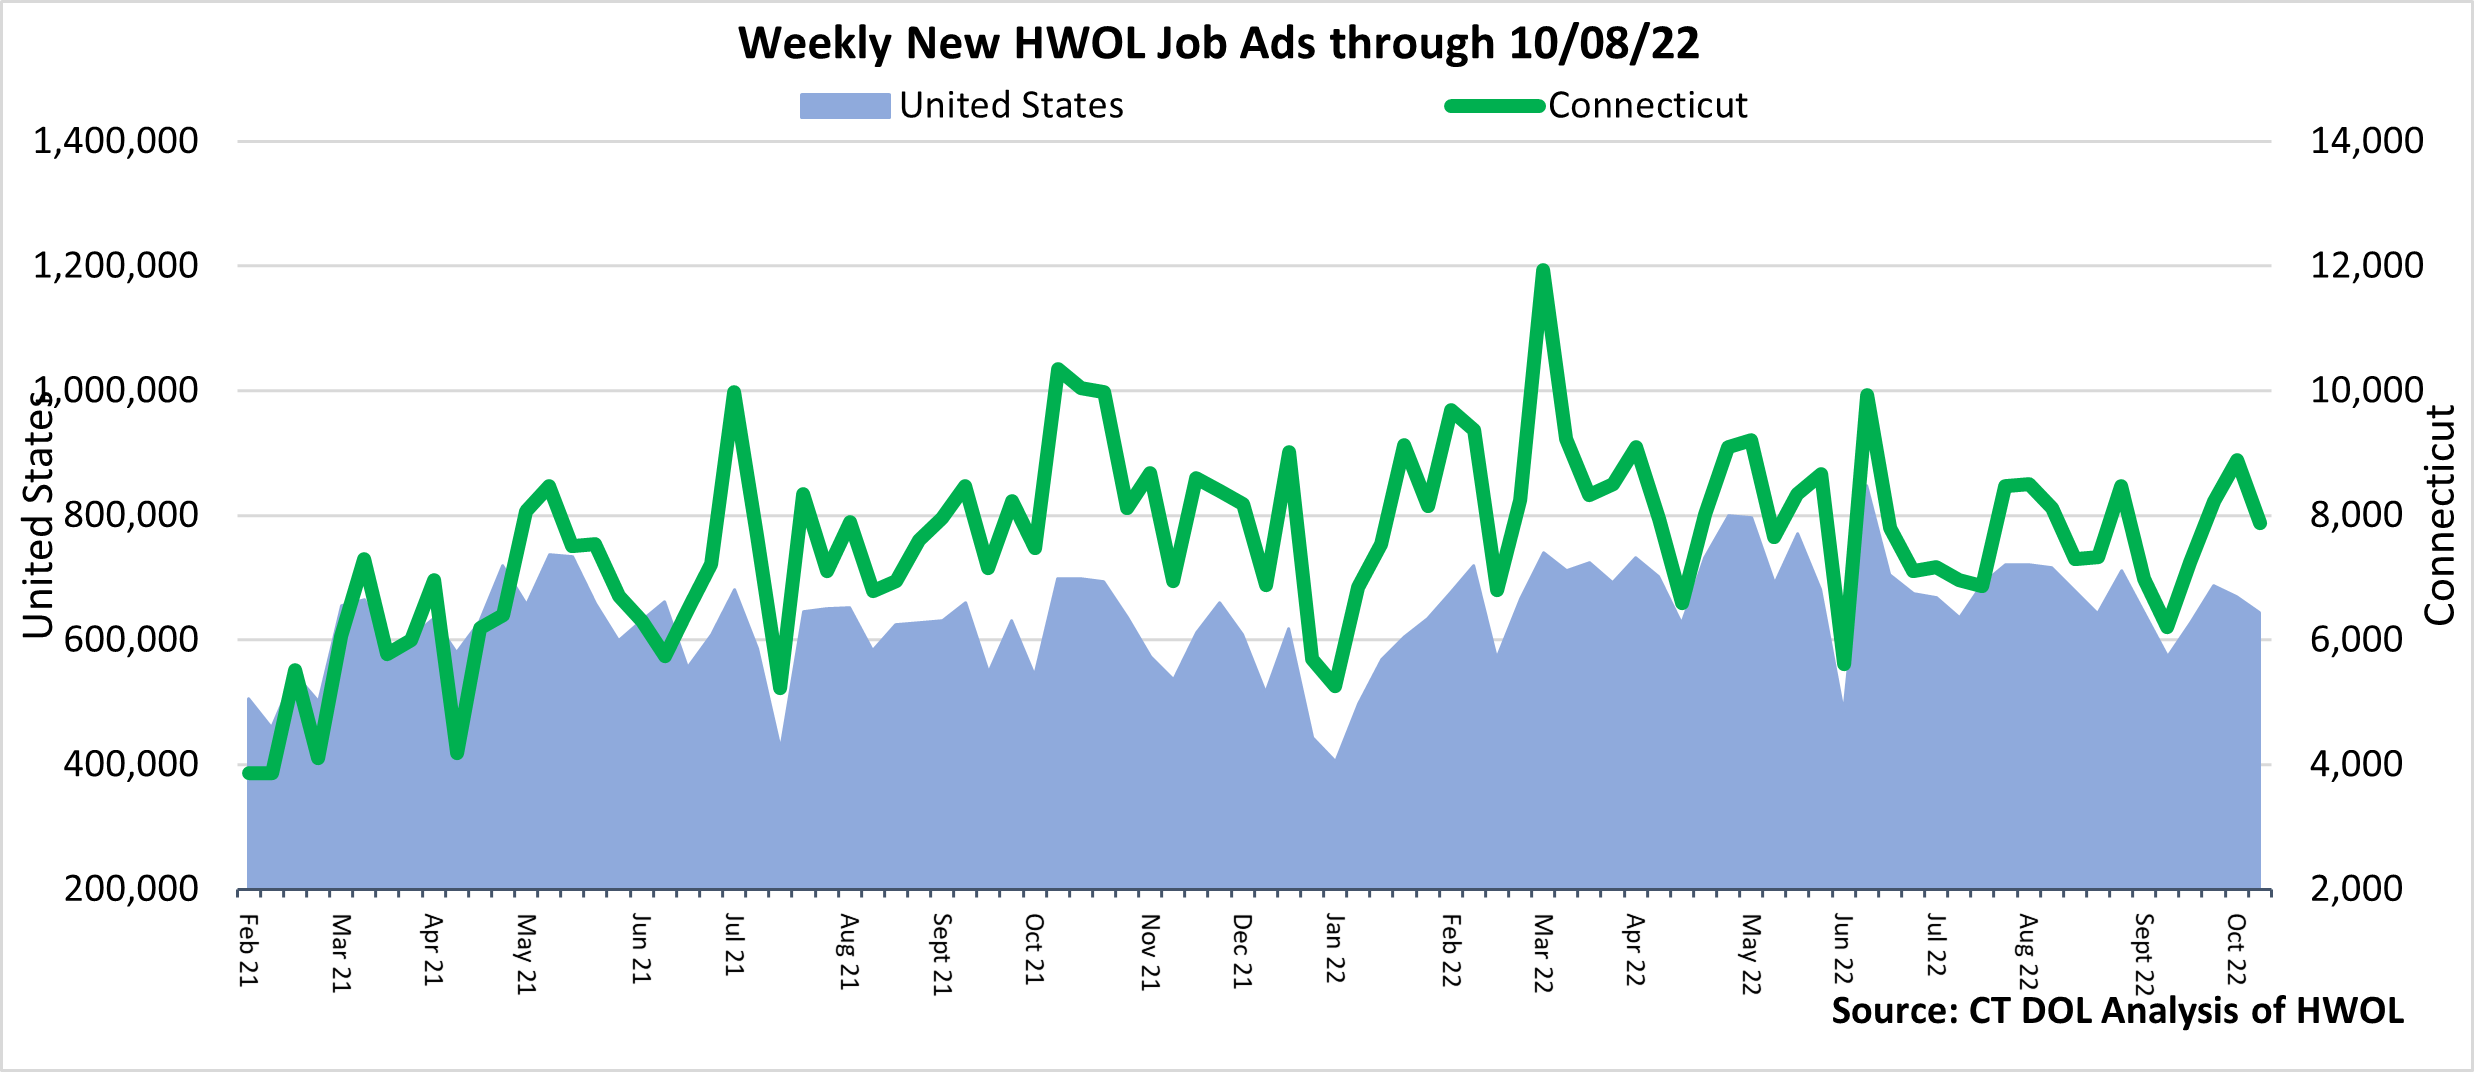 Connecticut Weekly Statewide New HWOL Job Ads through 10/08/22